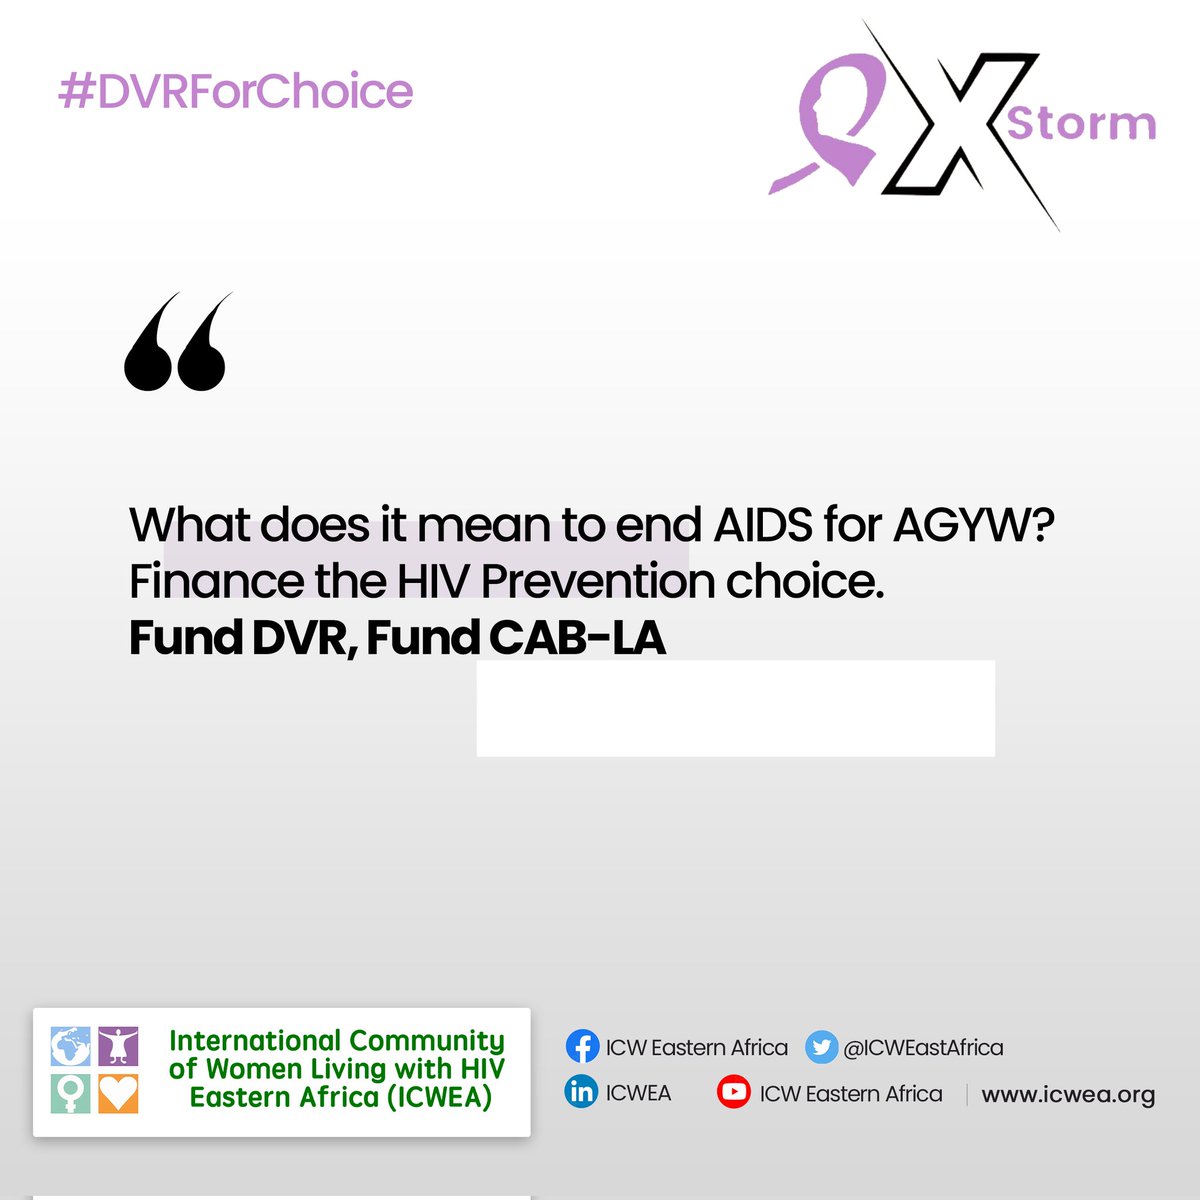 What does it mean to end AIDS for AGYW? Finance the HIV Prevention choice. Fund DVR, Fund CAB-LA. Cc: @Aidsfonds @ICWEastAfrica @UNAIDS @GlobalFund @PEPFAR @Jnkengasong @aidscommission @HIVpxresearch @unwomenuganda #DVRForChoice #PreventionByChoice #ChoiceManifesto